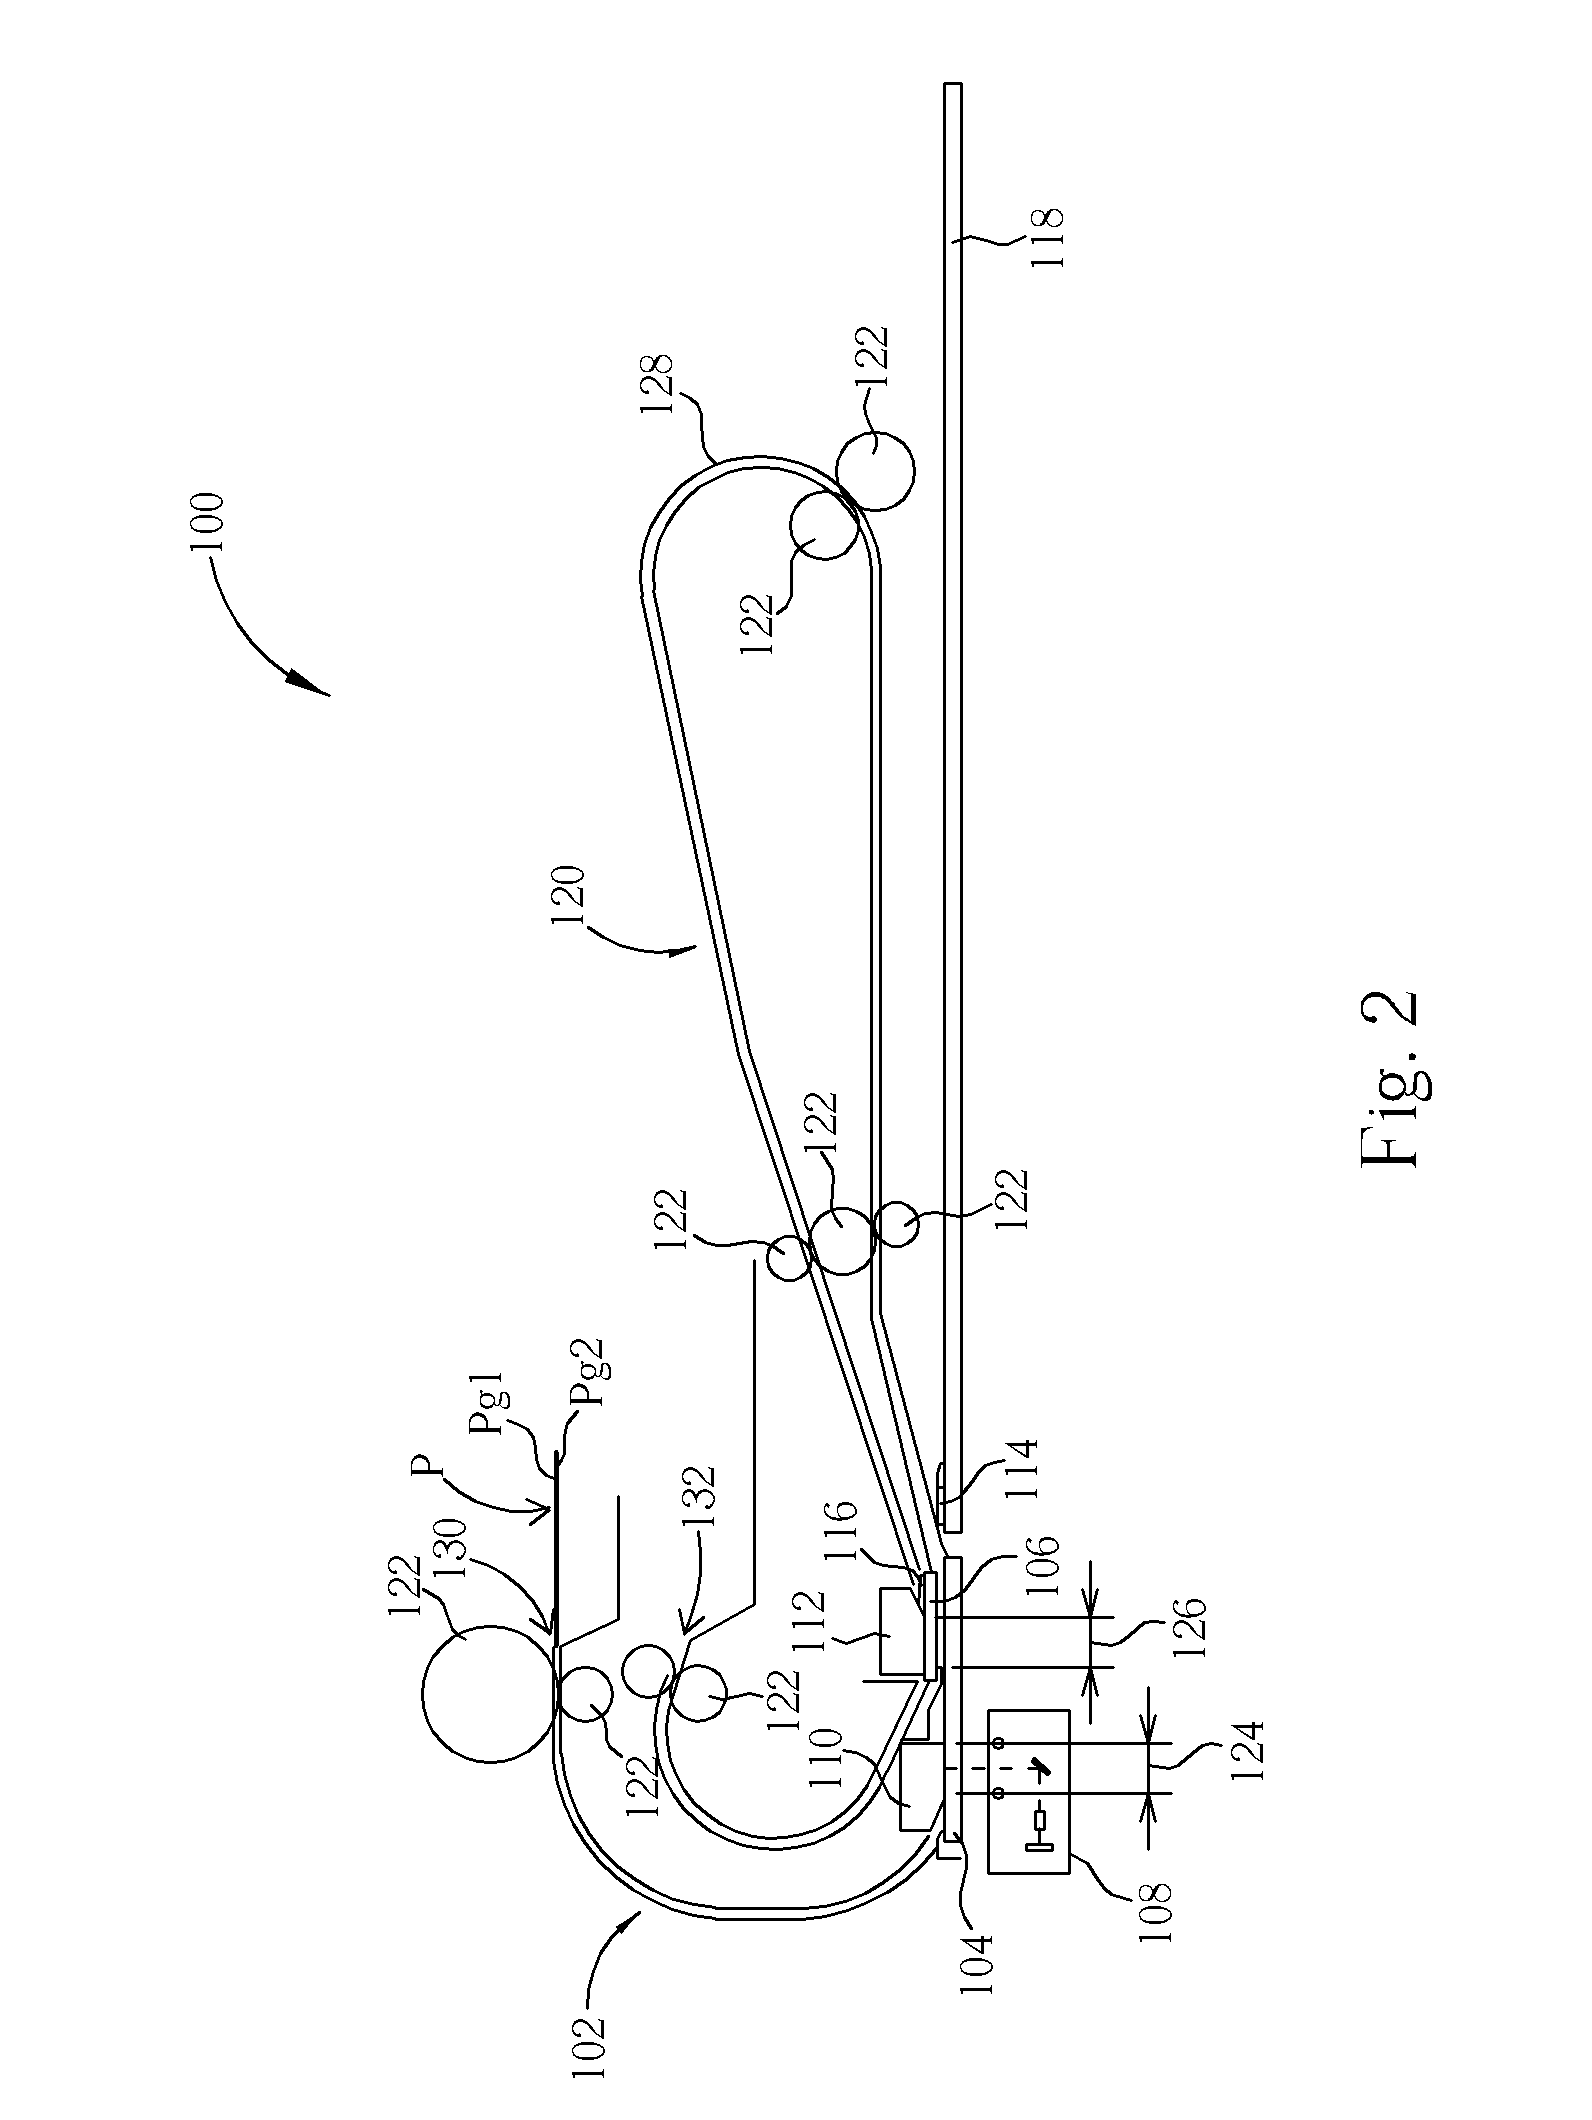 Double-side scan device with movable image scan module